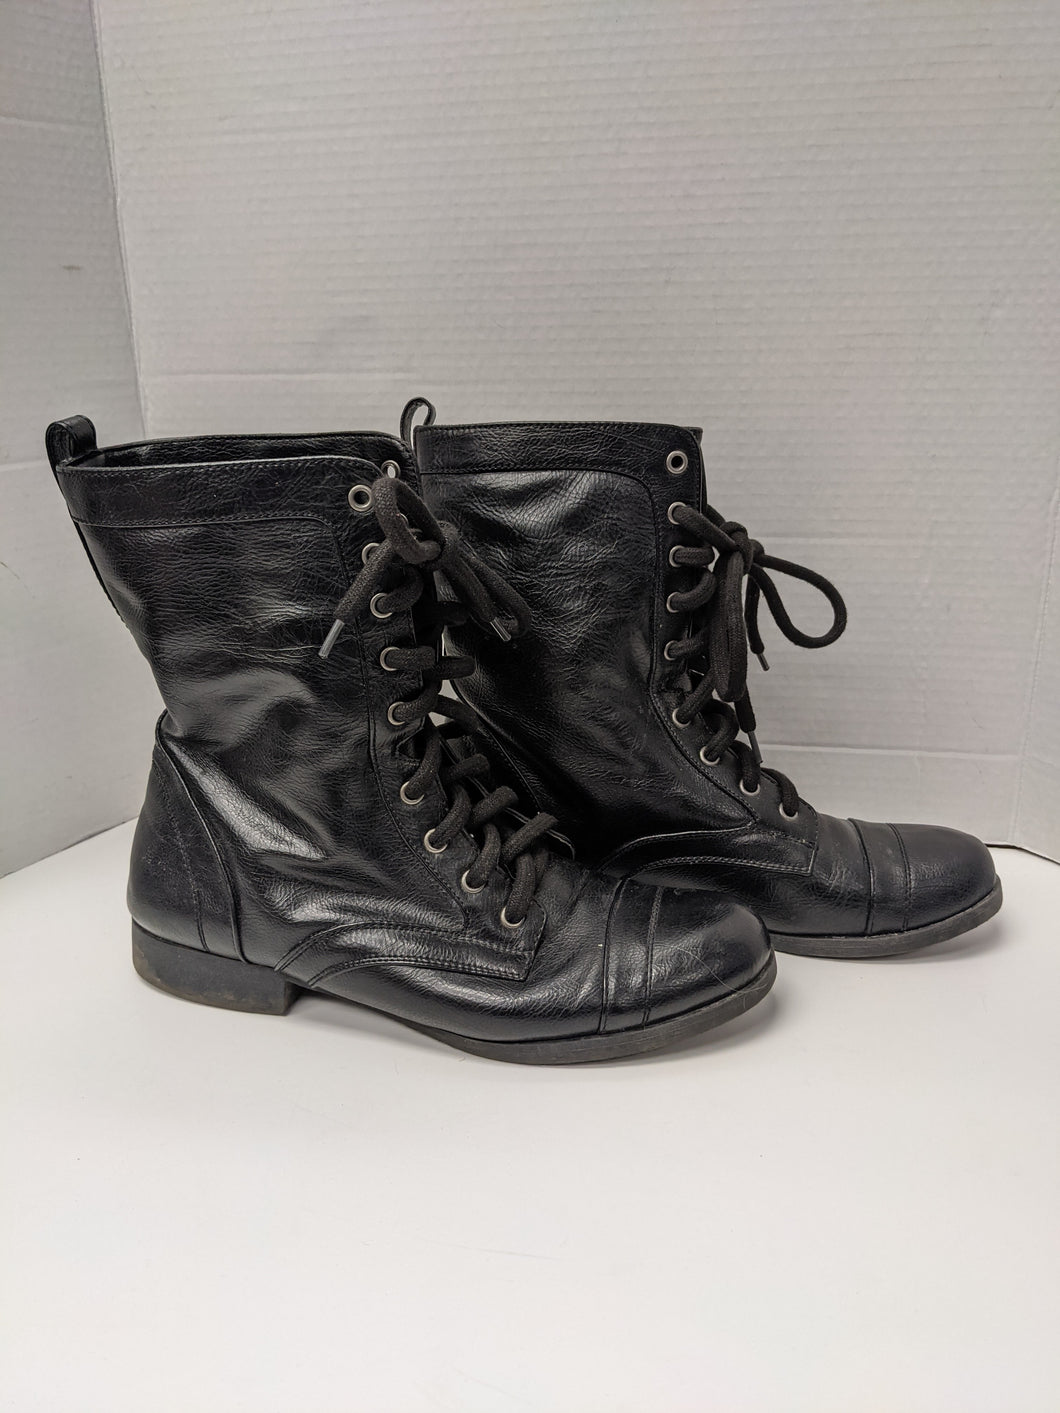 Boots - Size 11